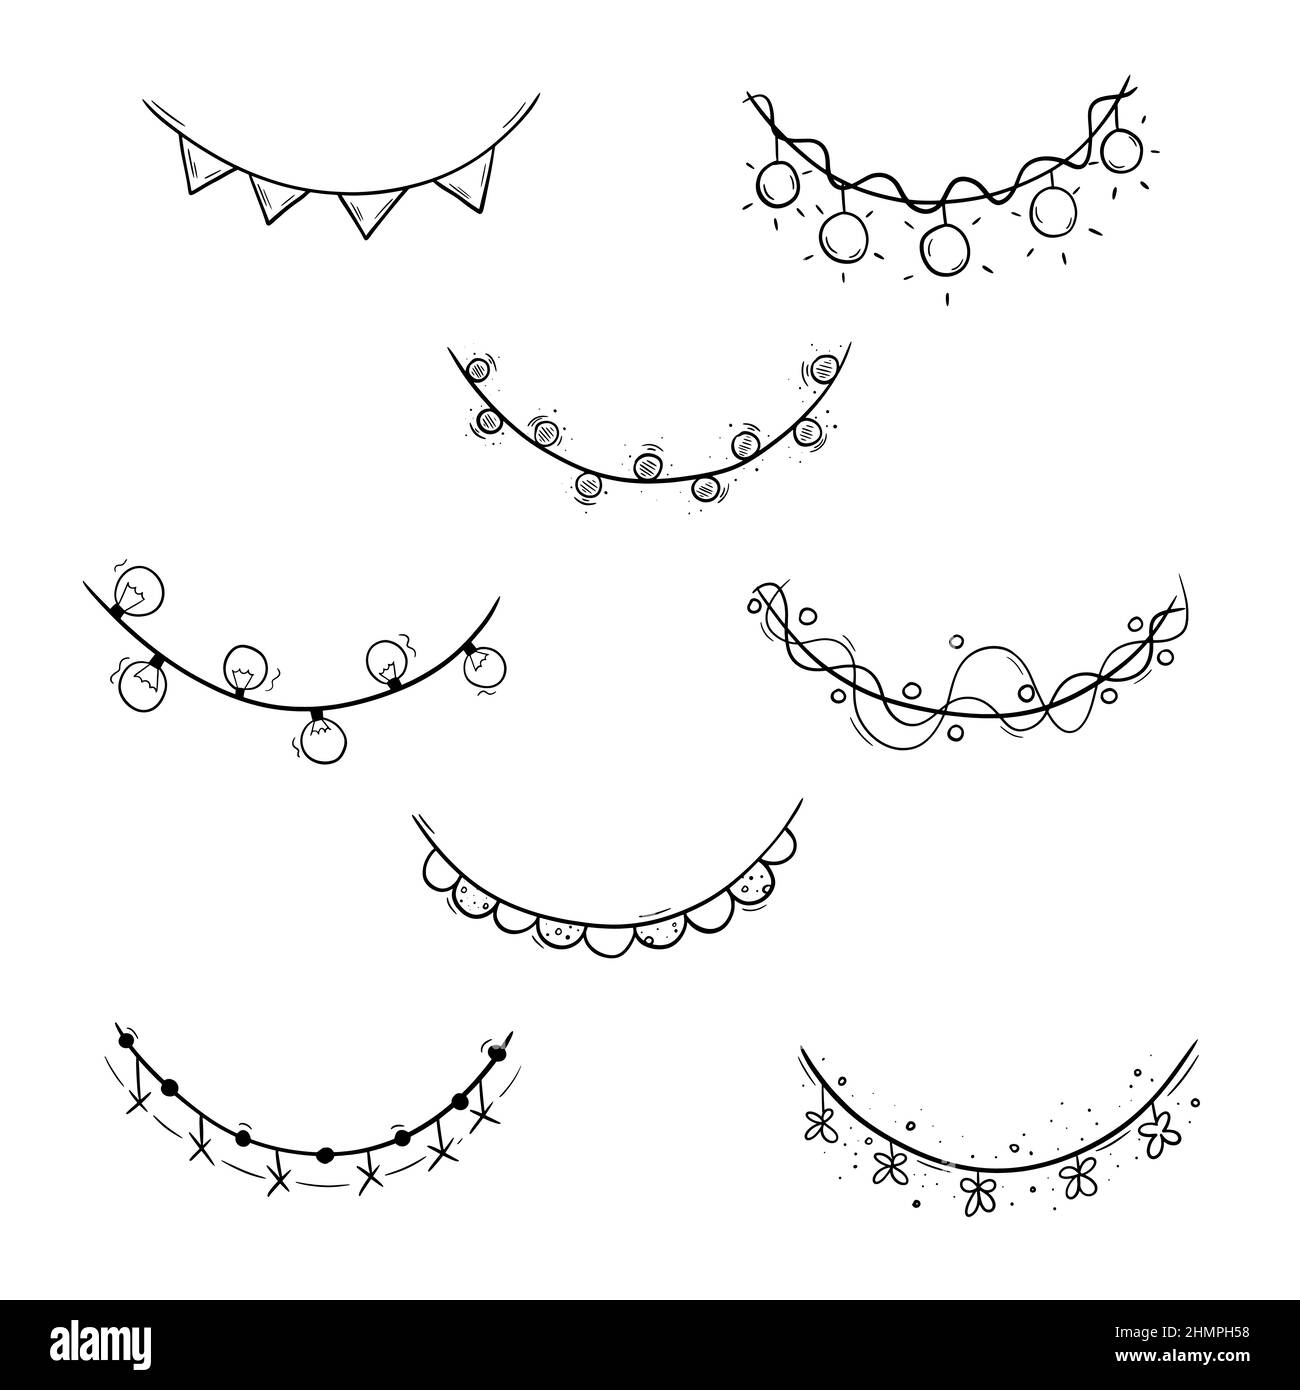 Doodle style garland set with black outline. Triangle, lamp, flowers garland. Stock Vector